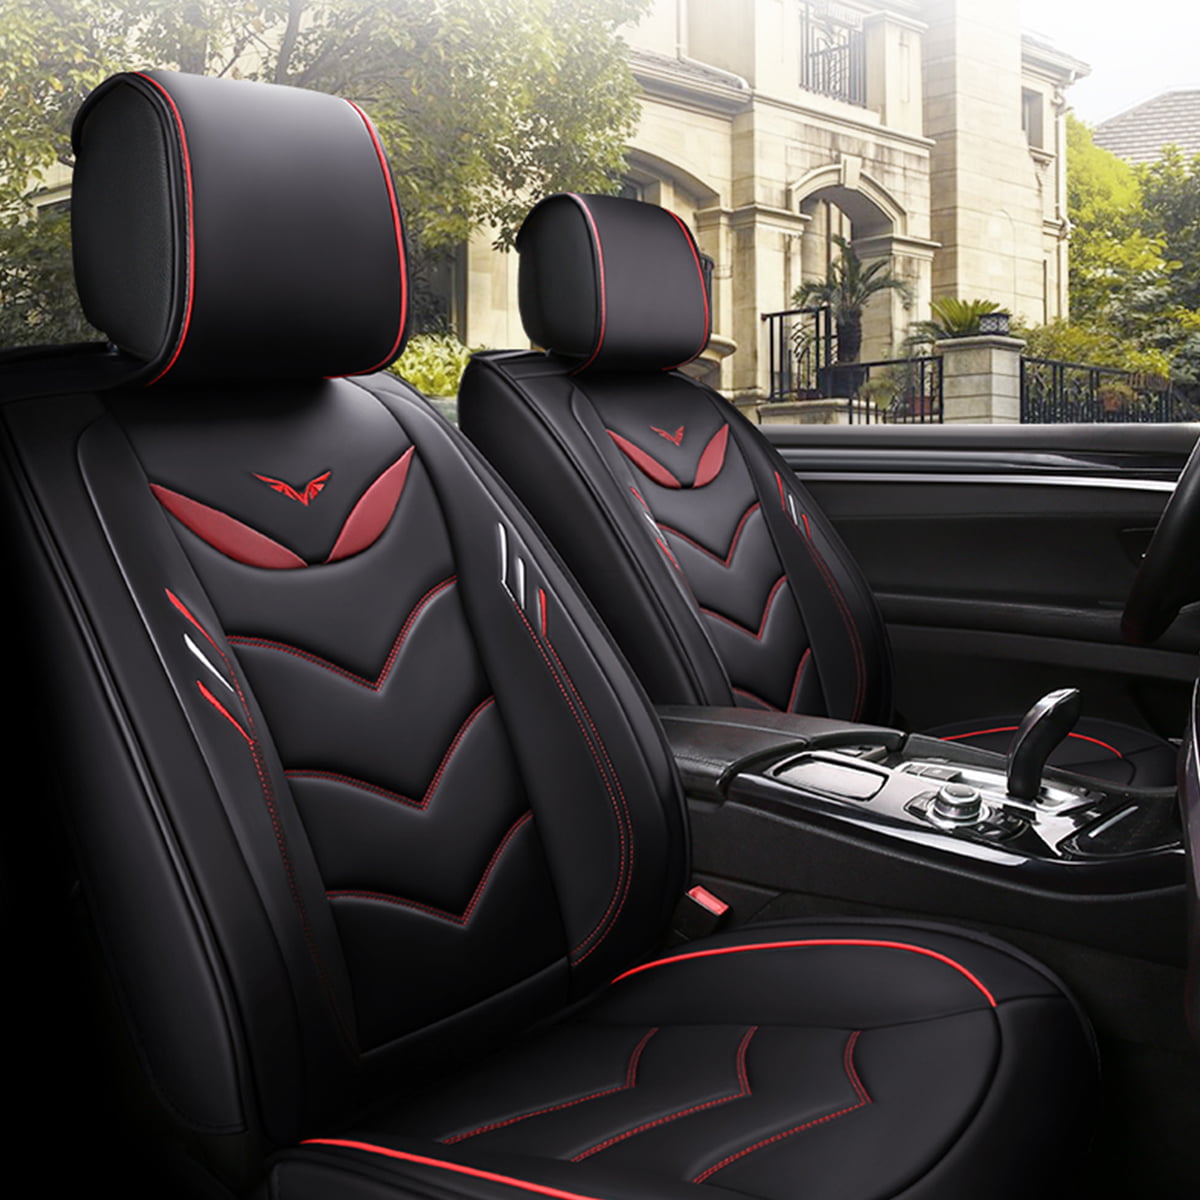 Luxury Car Seat Covers Protectors For Front Seats Car Front Seat Cover Pu Leather Cushion Seat